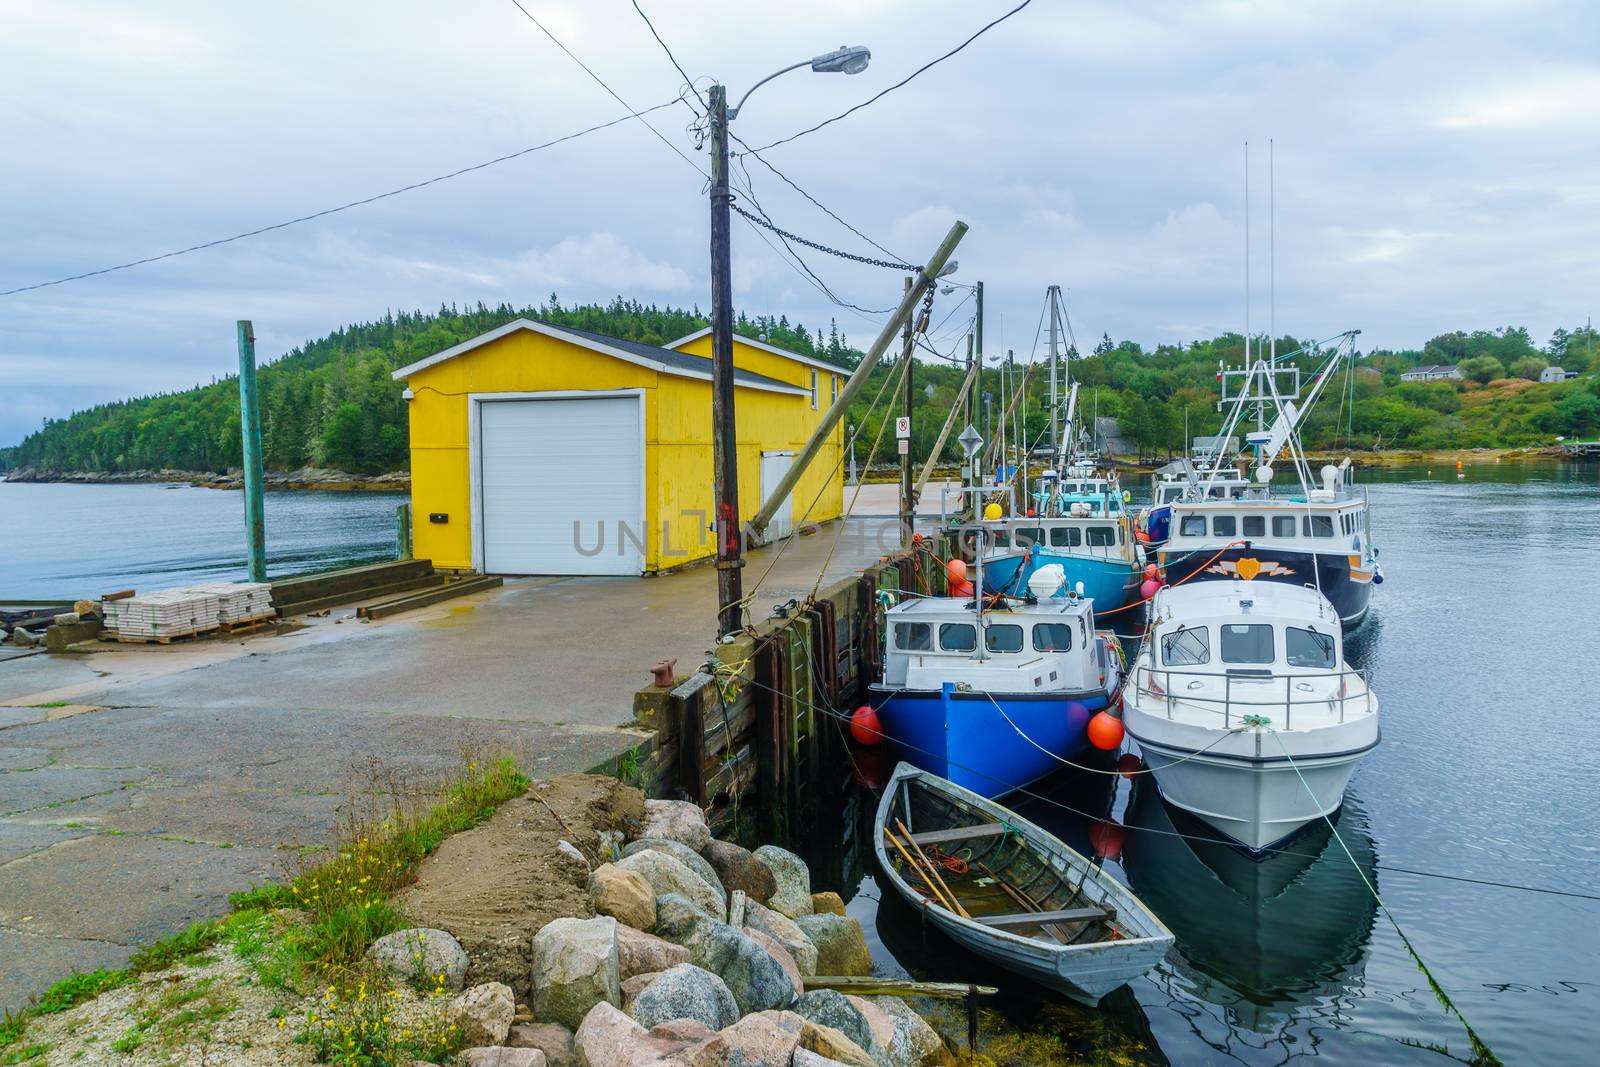 Views of the bay, boats and waterfront buildings in Northwest Cove, Nova Scotia, Canada